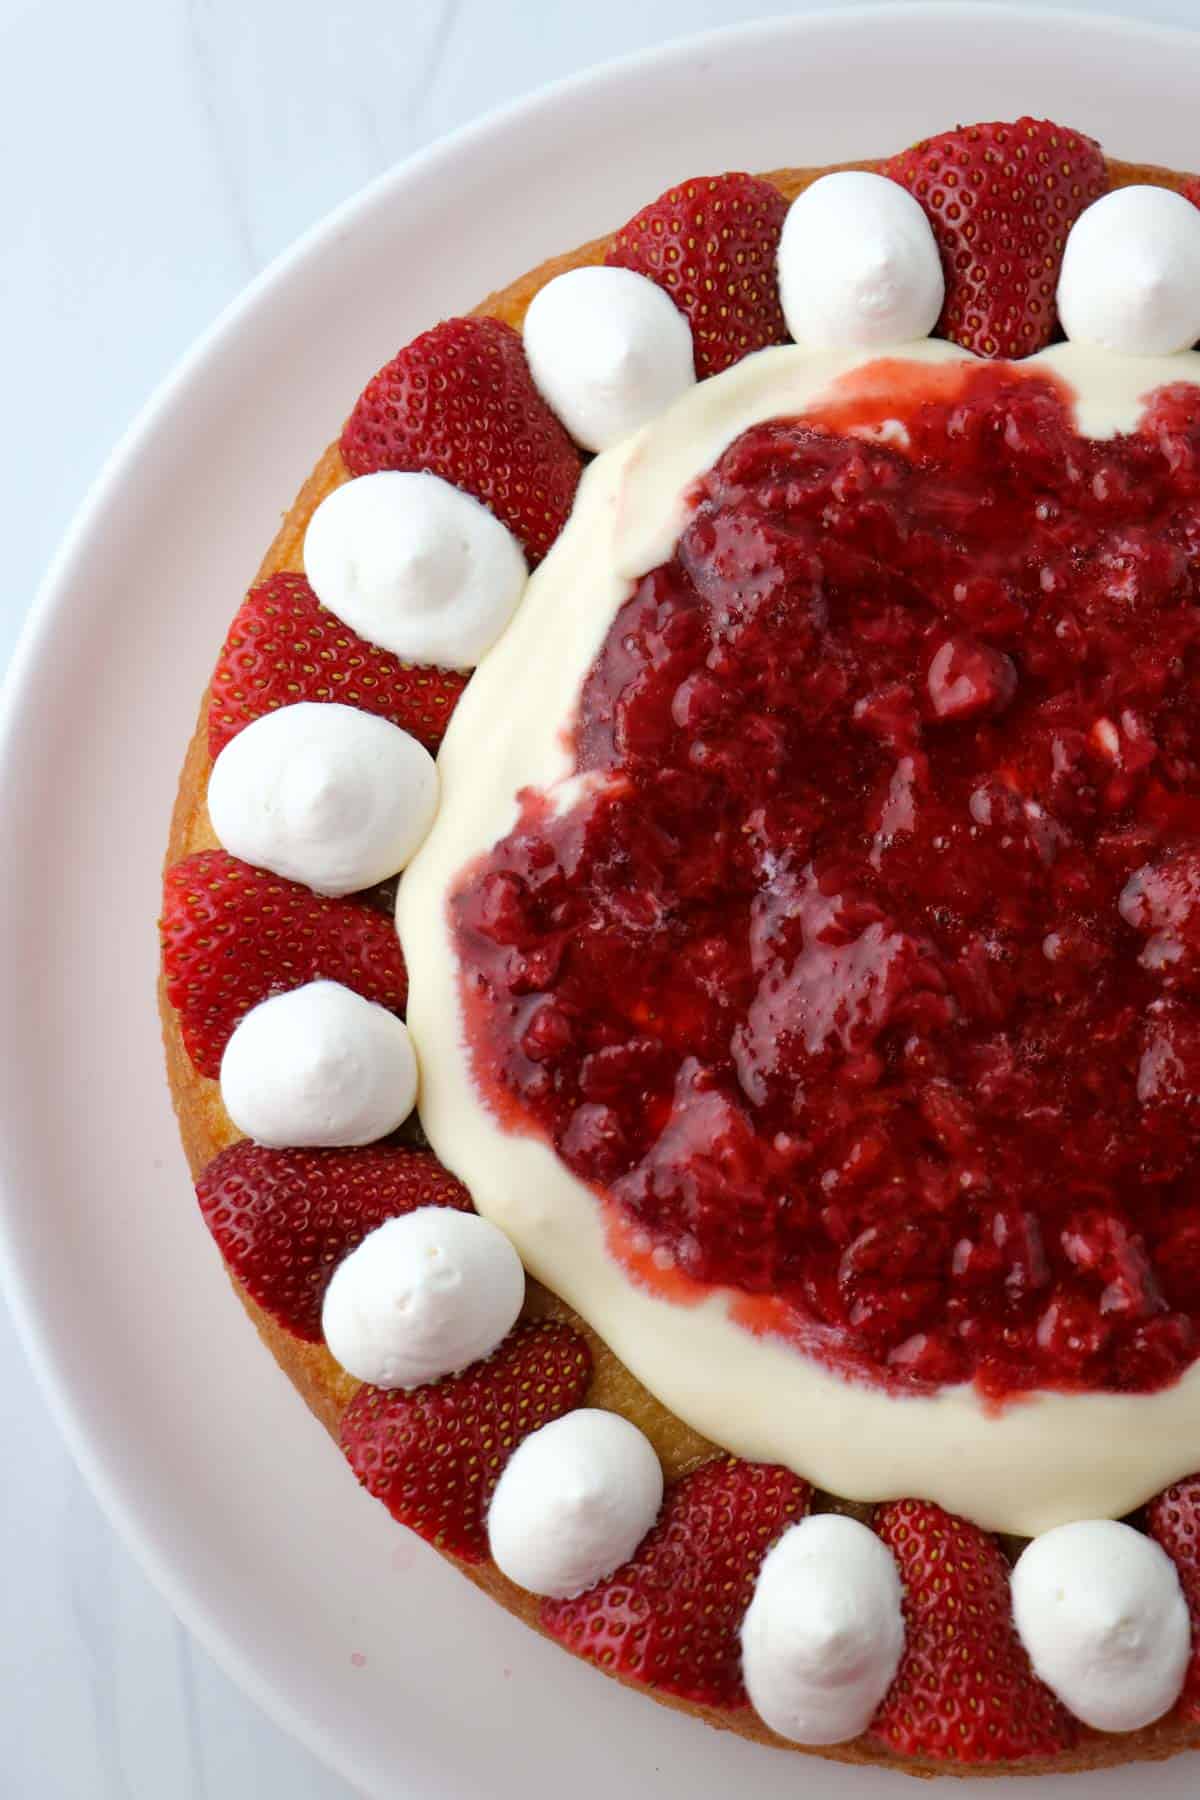 Cake topped with strawberries, whipped cream, pastry cream and roasted strawberries.